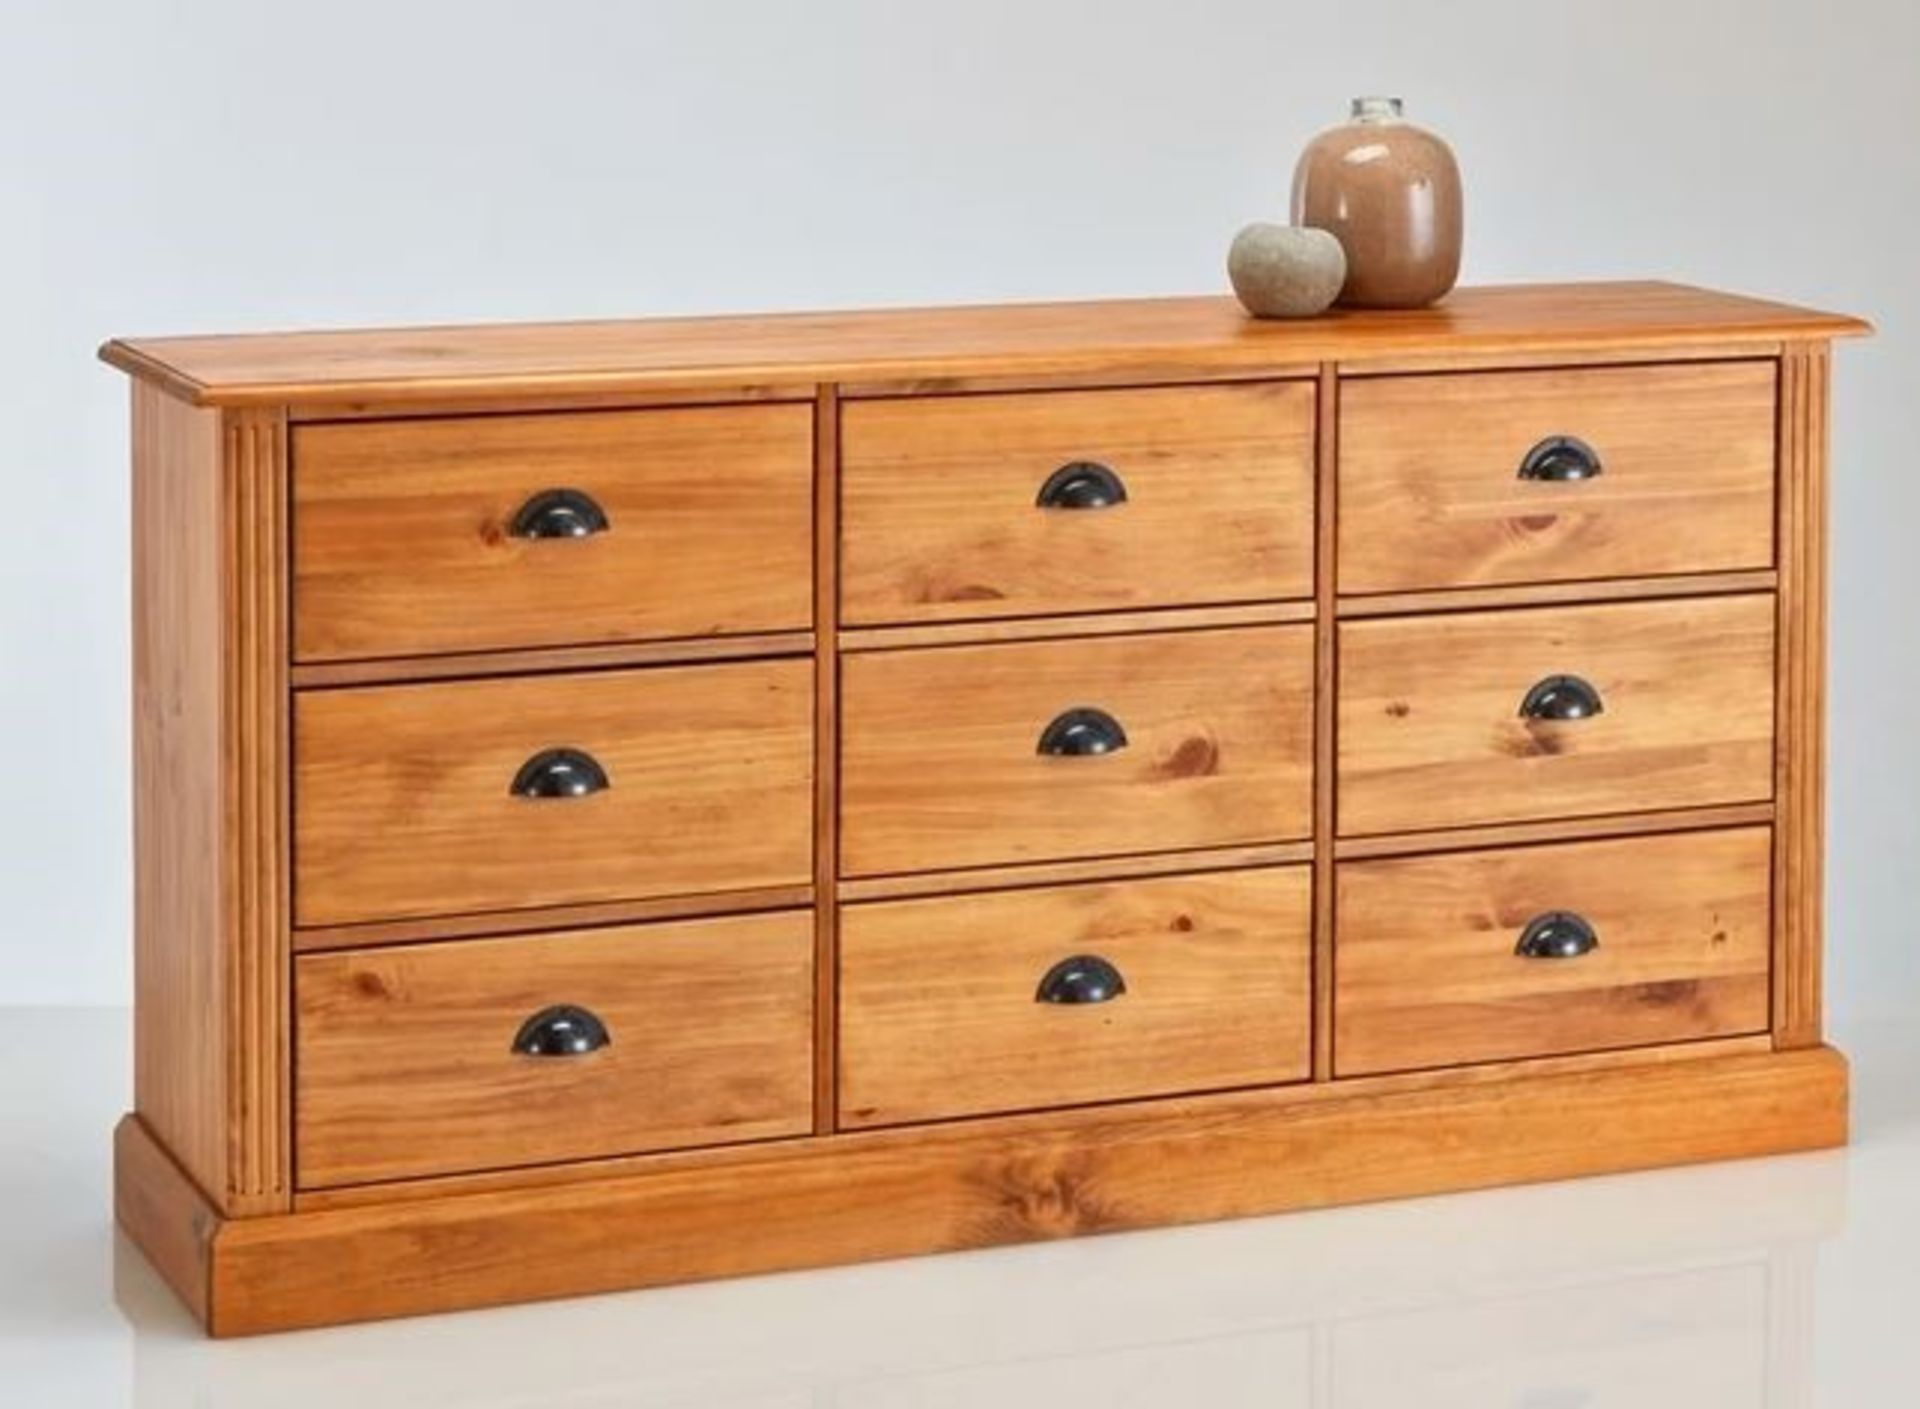 1 GRADE B BOXED DESIGNER AUTHENTIC STYLE SOLID PINE SIDEBOARD / RRP £550.00 (PUBLIC VIEWING